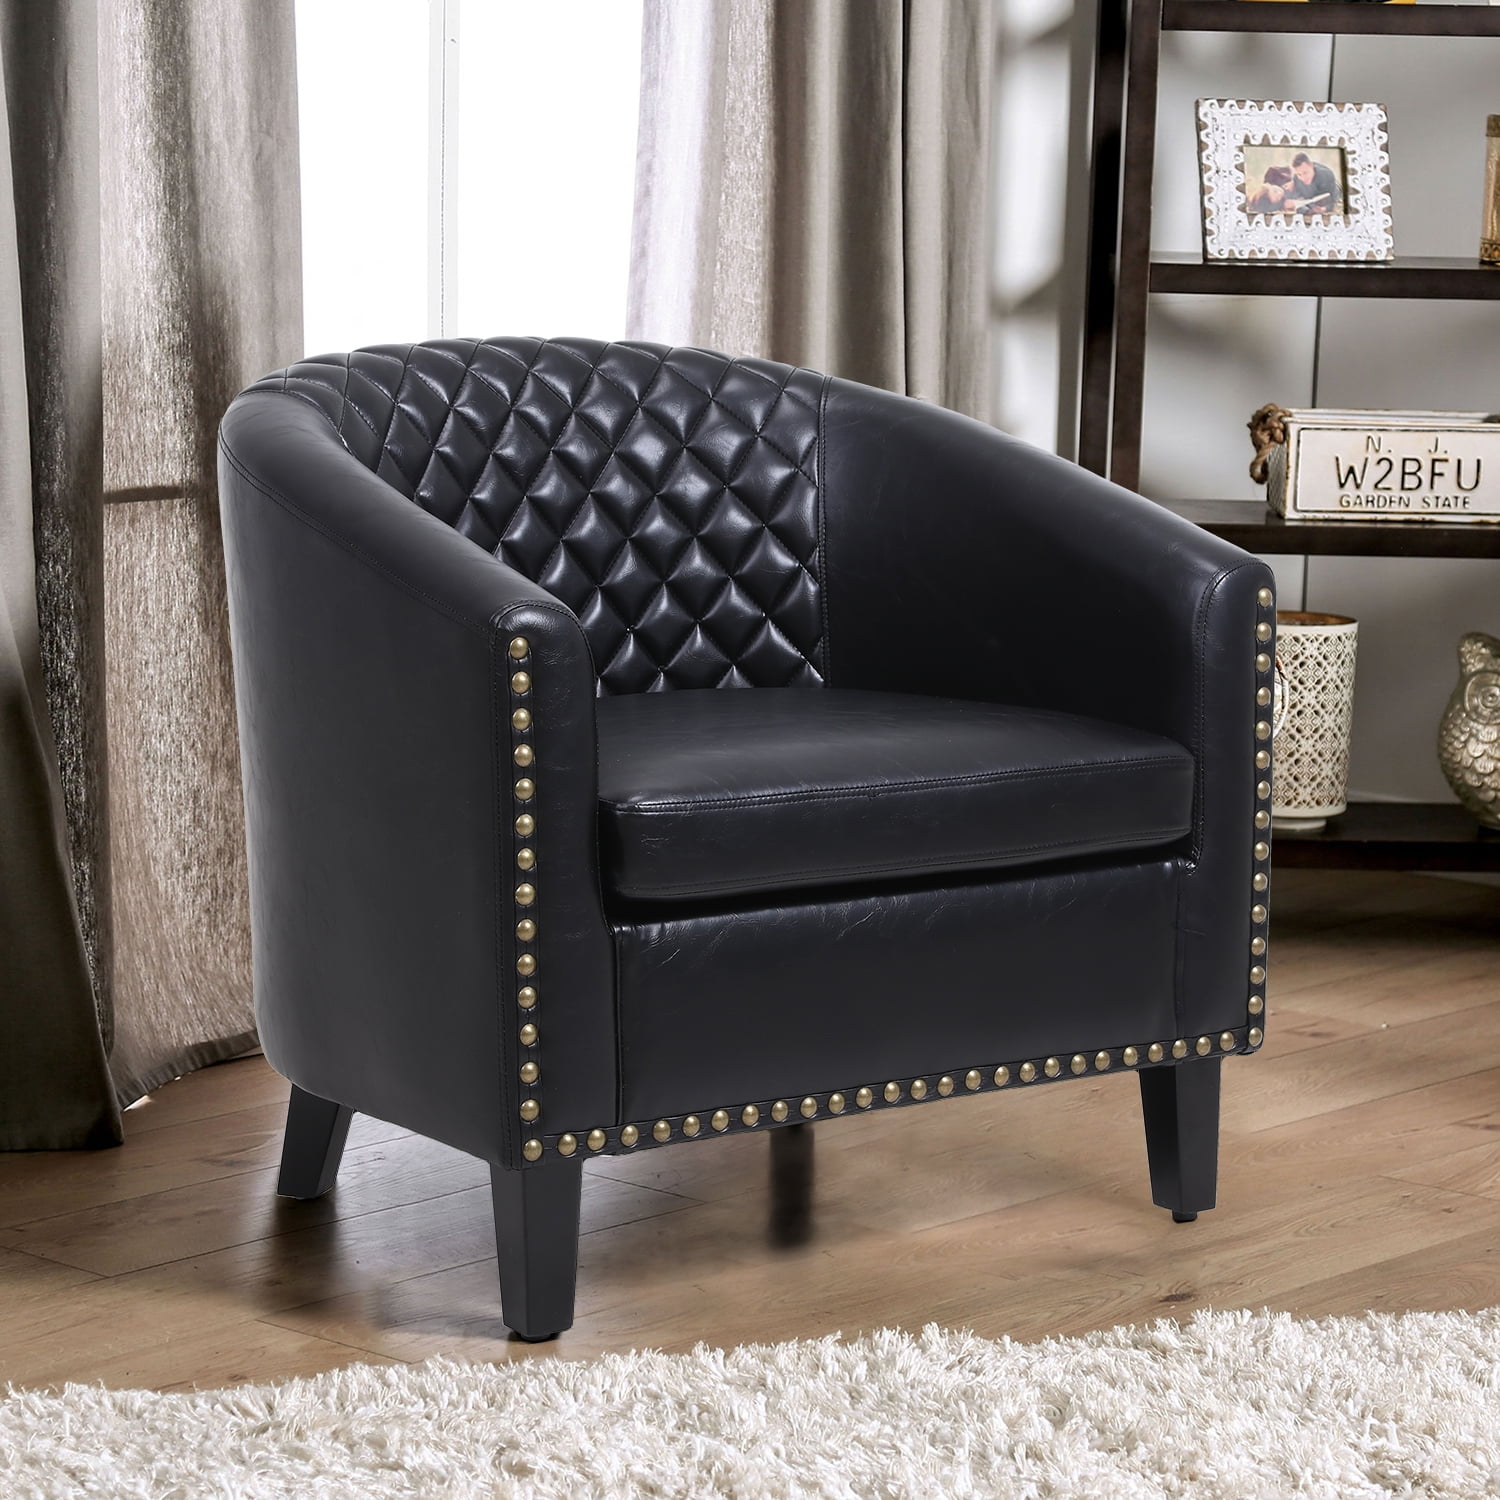 Details about   PU Leather Tufted Barrel ChairTub Chair For Living Room Bedroom Club Chairs US 